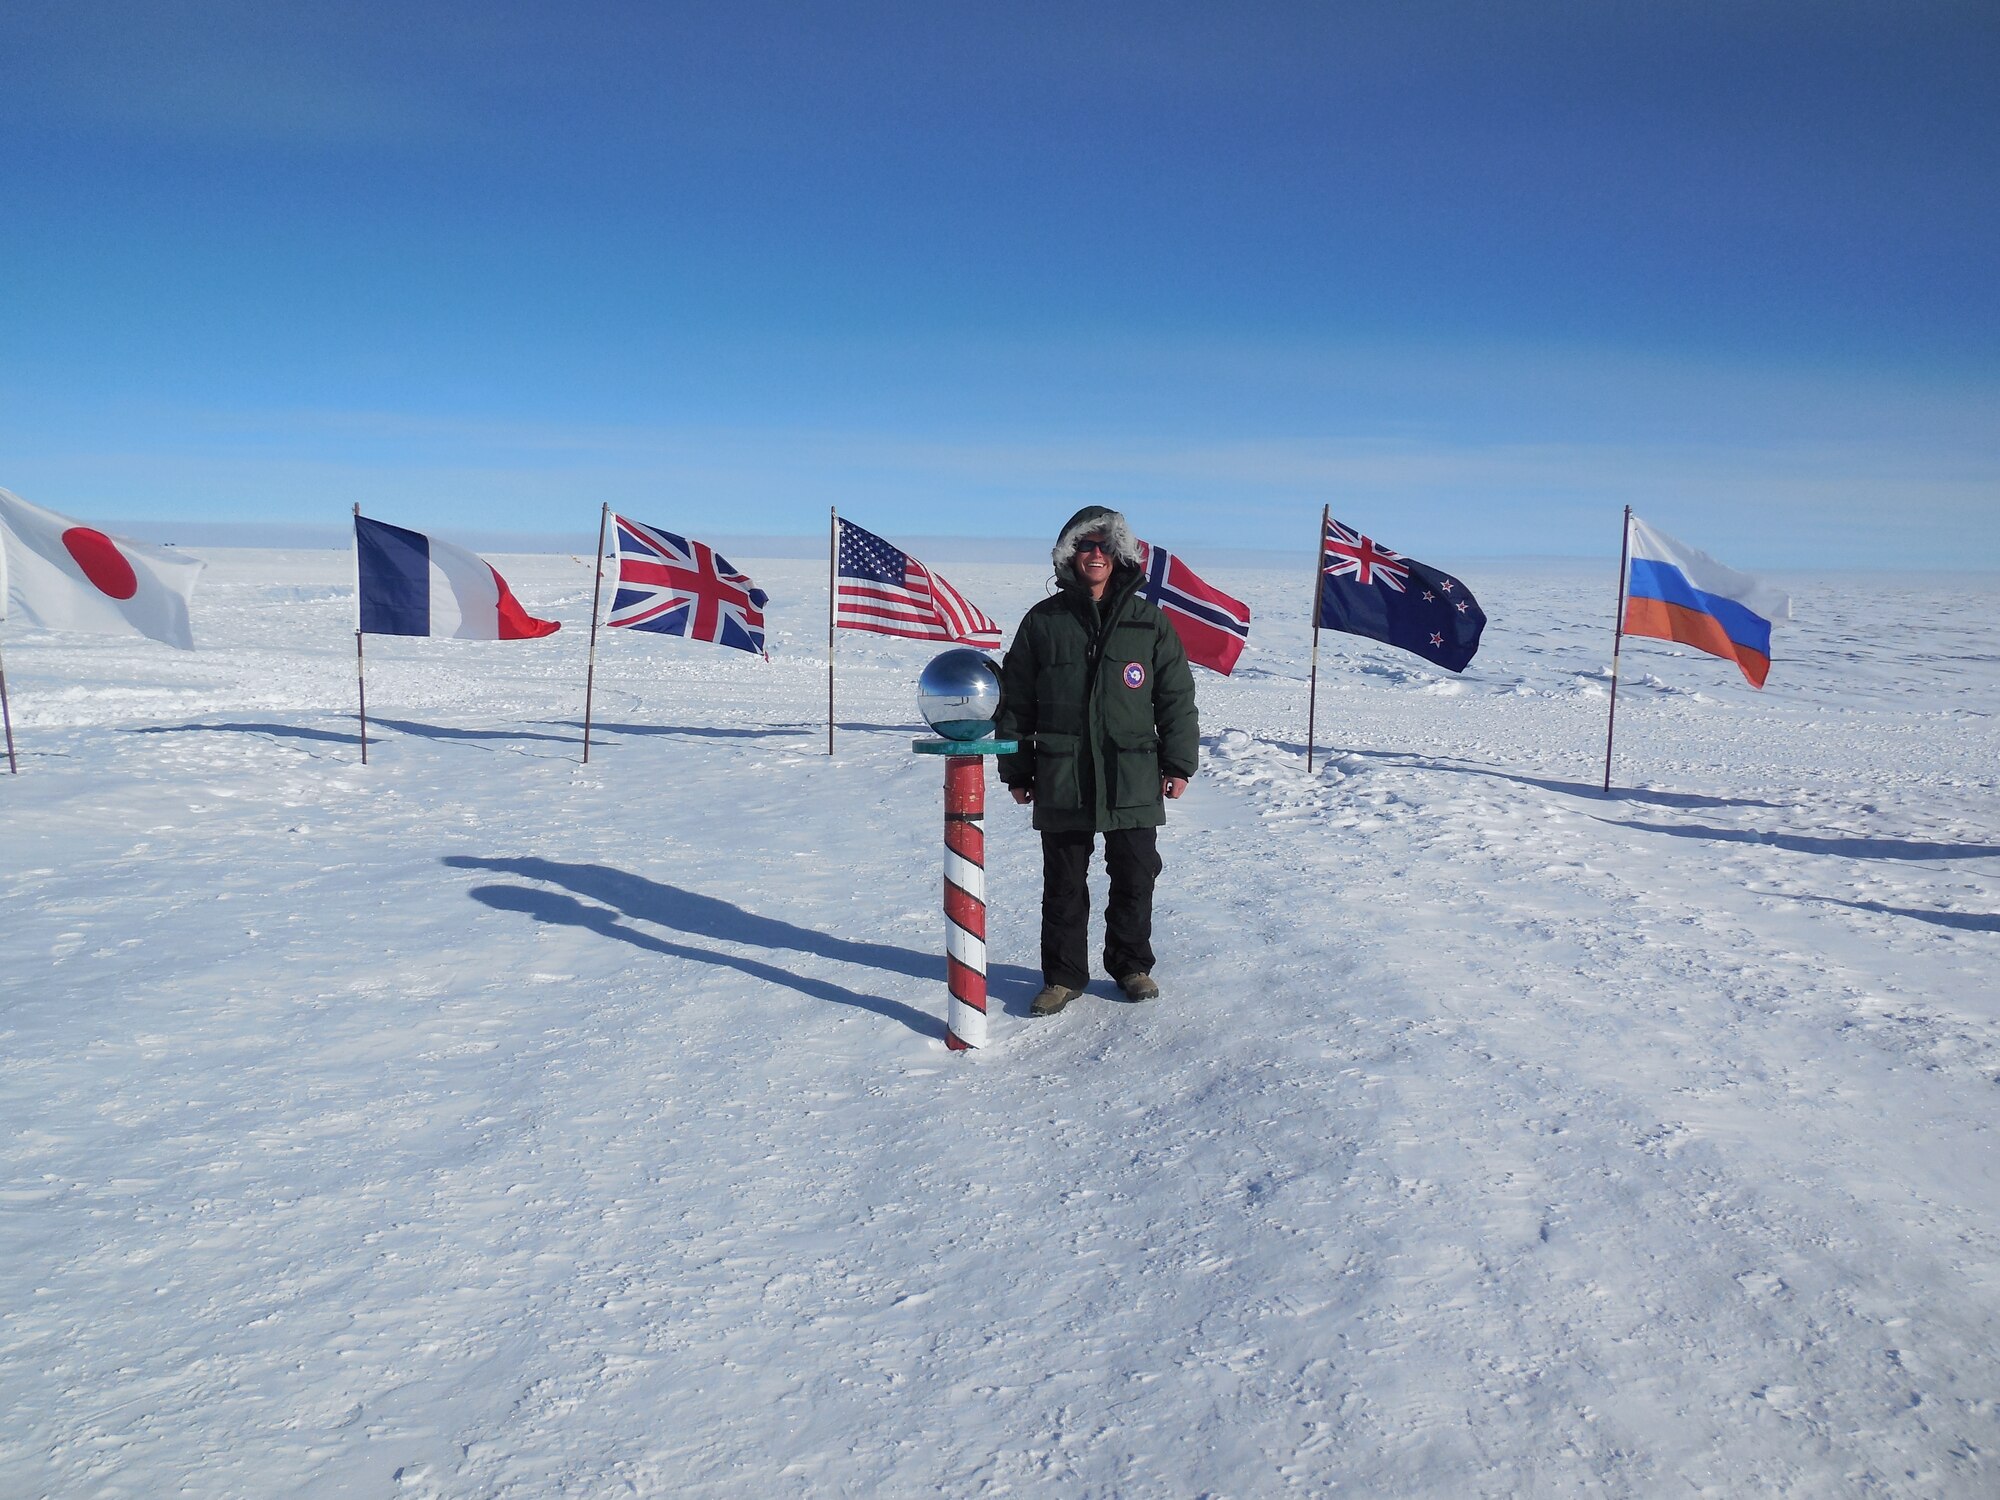 Cadet 1st Class Glen Hanson stands at the South Pole in December. The meteorology major spent a week observing climate, satellite, biological and astronomical research at McMurdo Station, Antarctica. (Courtesy photo) 

